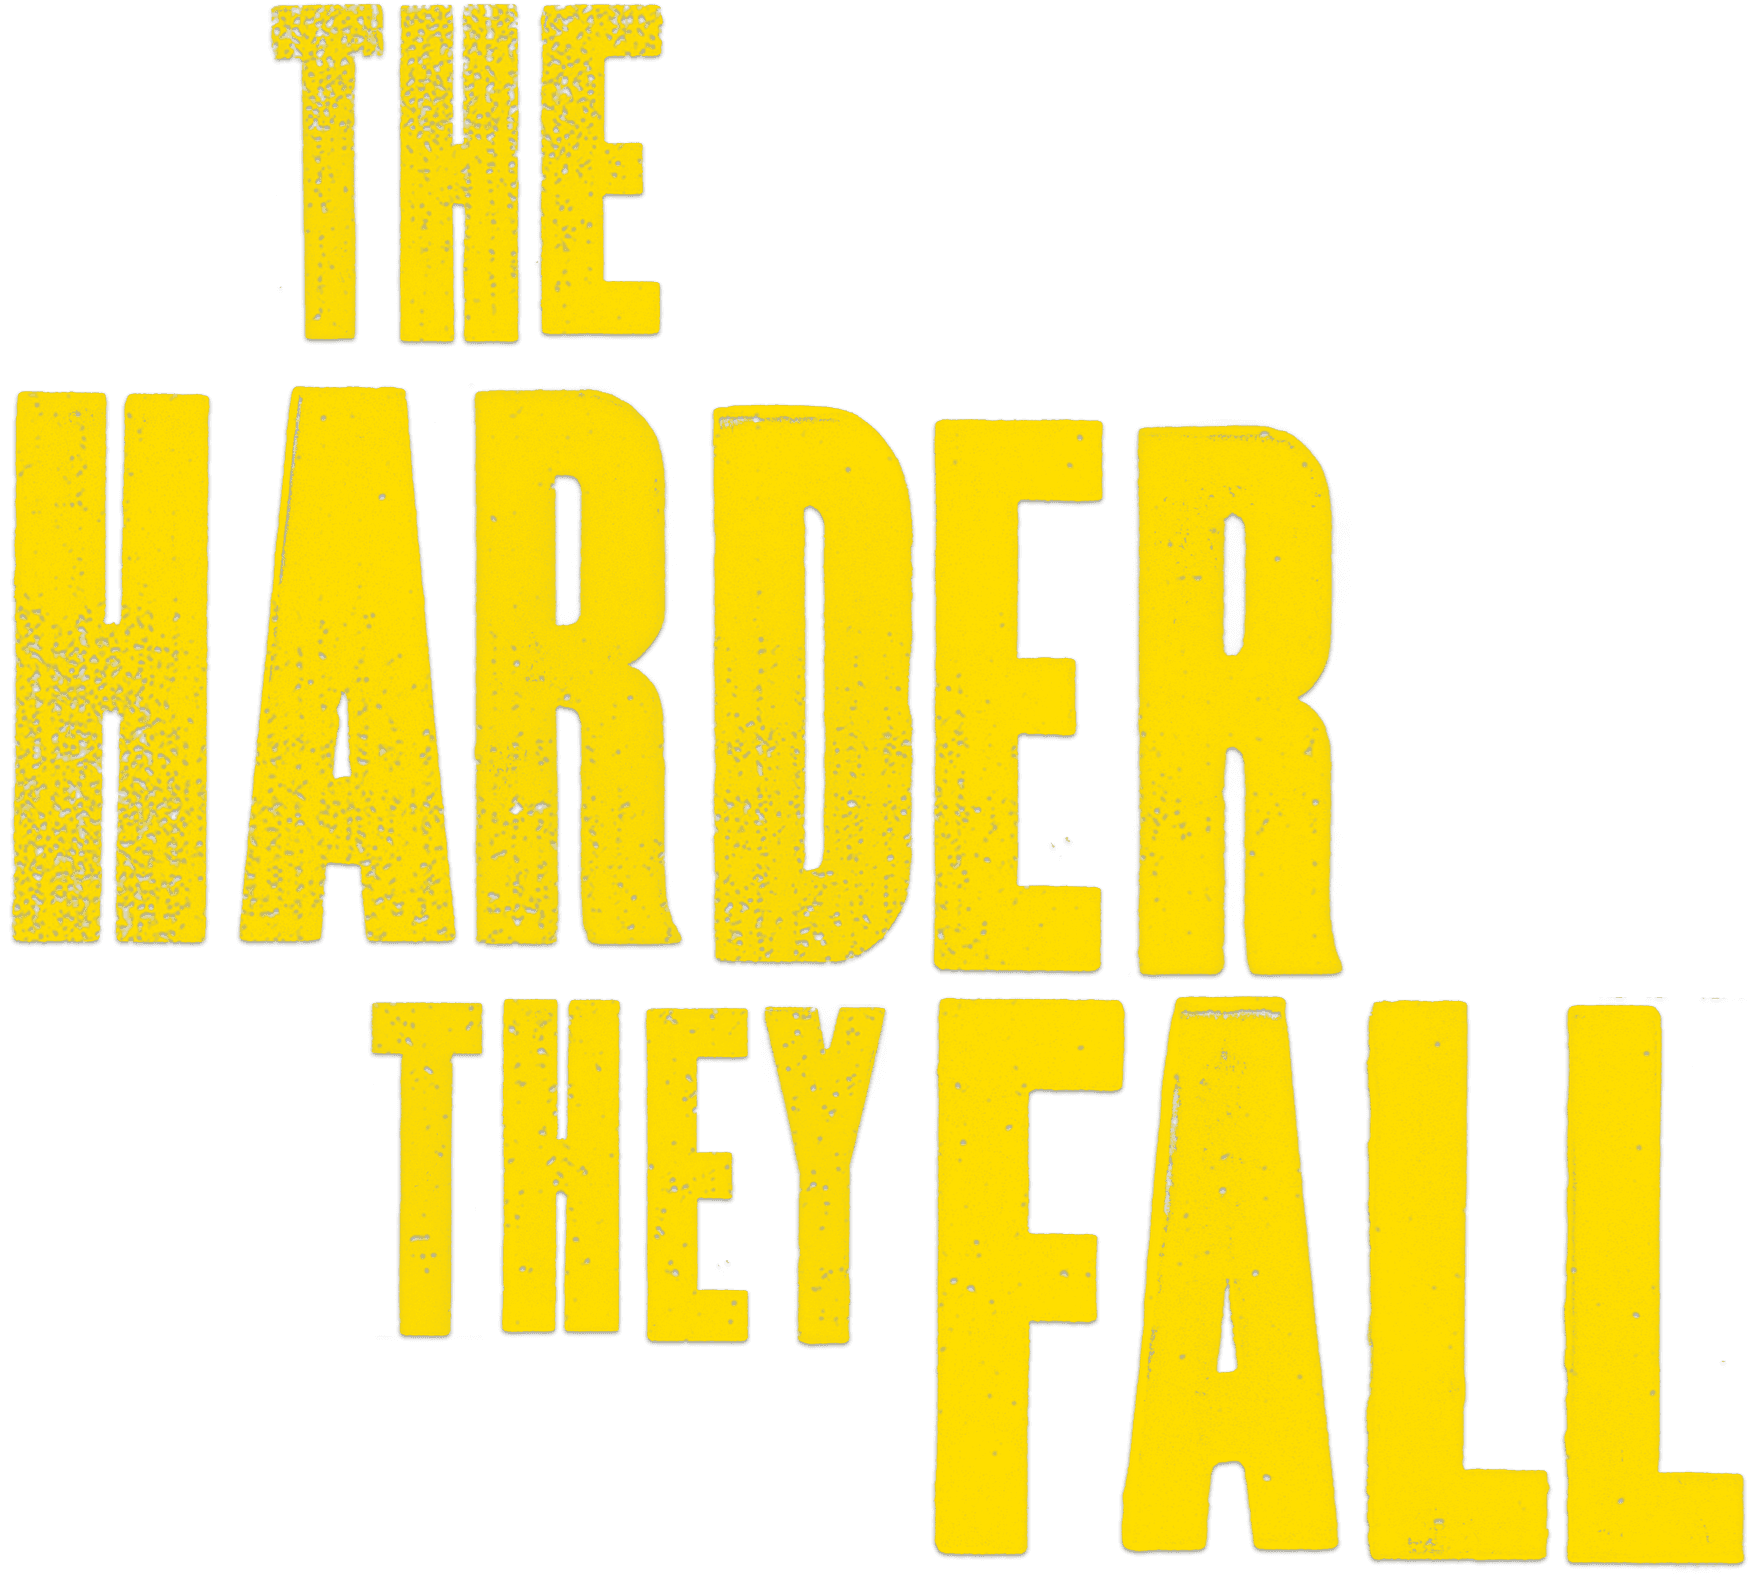 The Harder They Fall logo